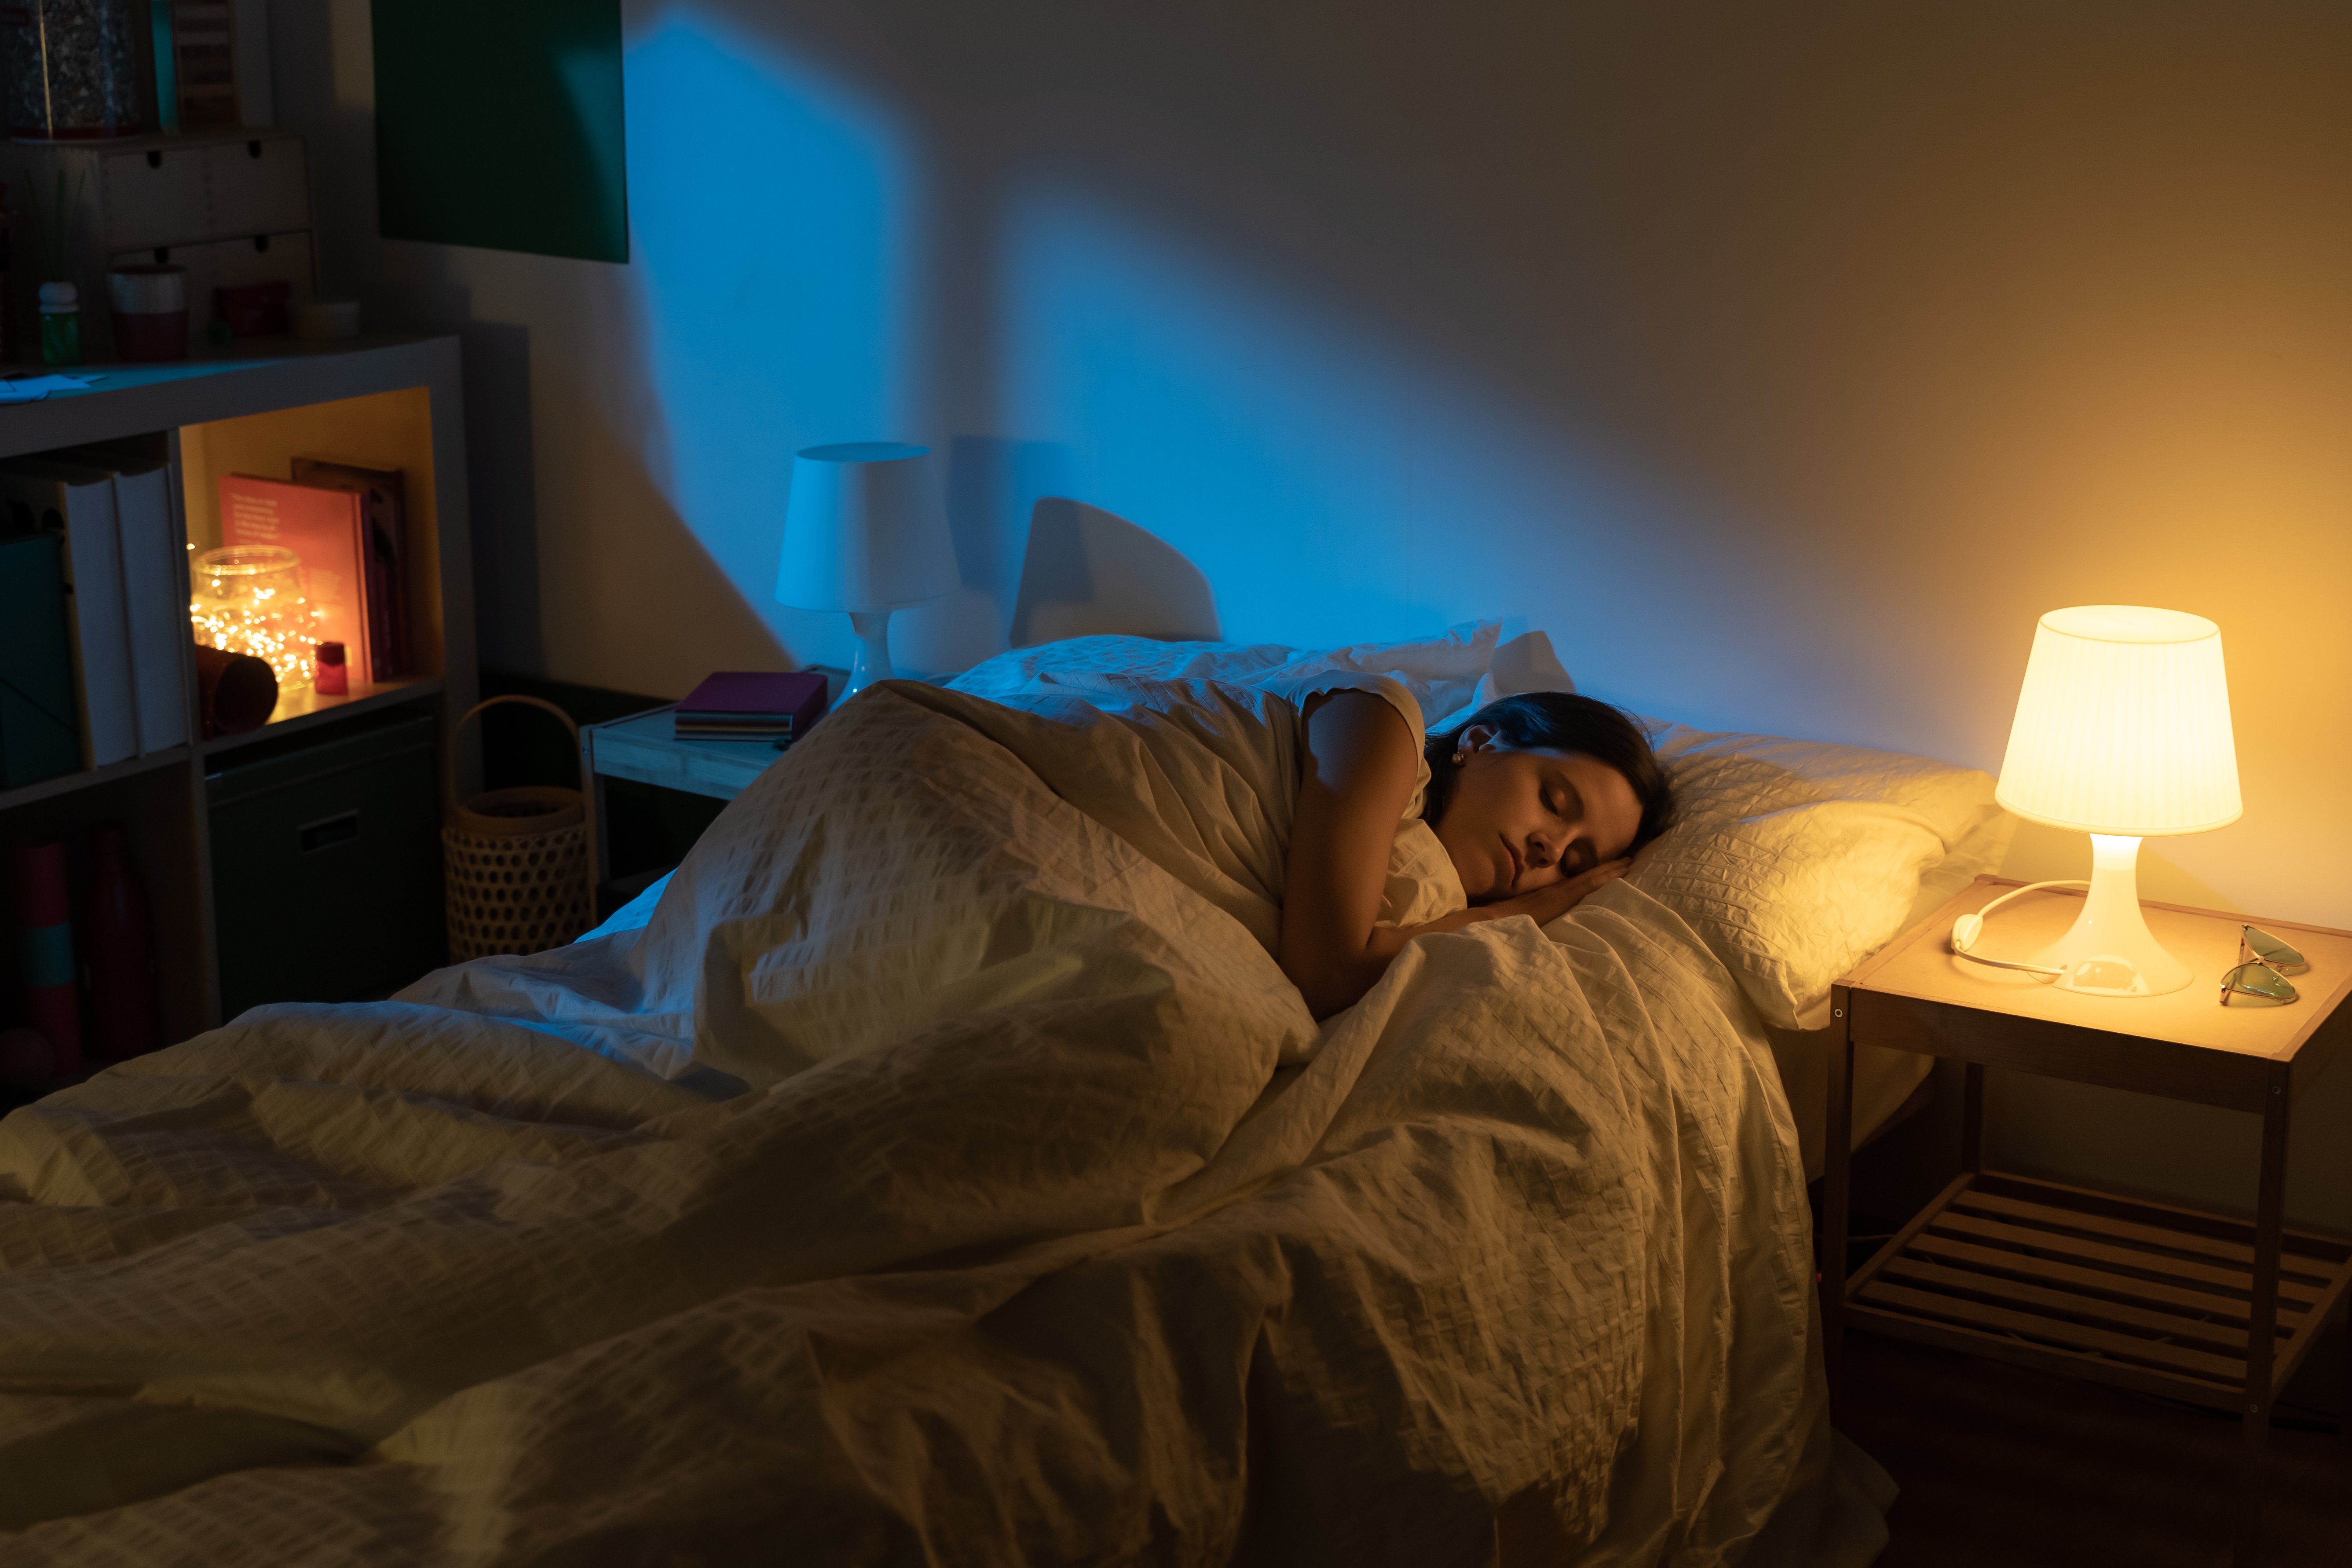 A woman in bed | Source: Shutterstock